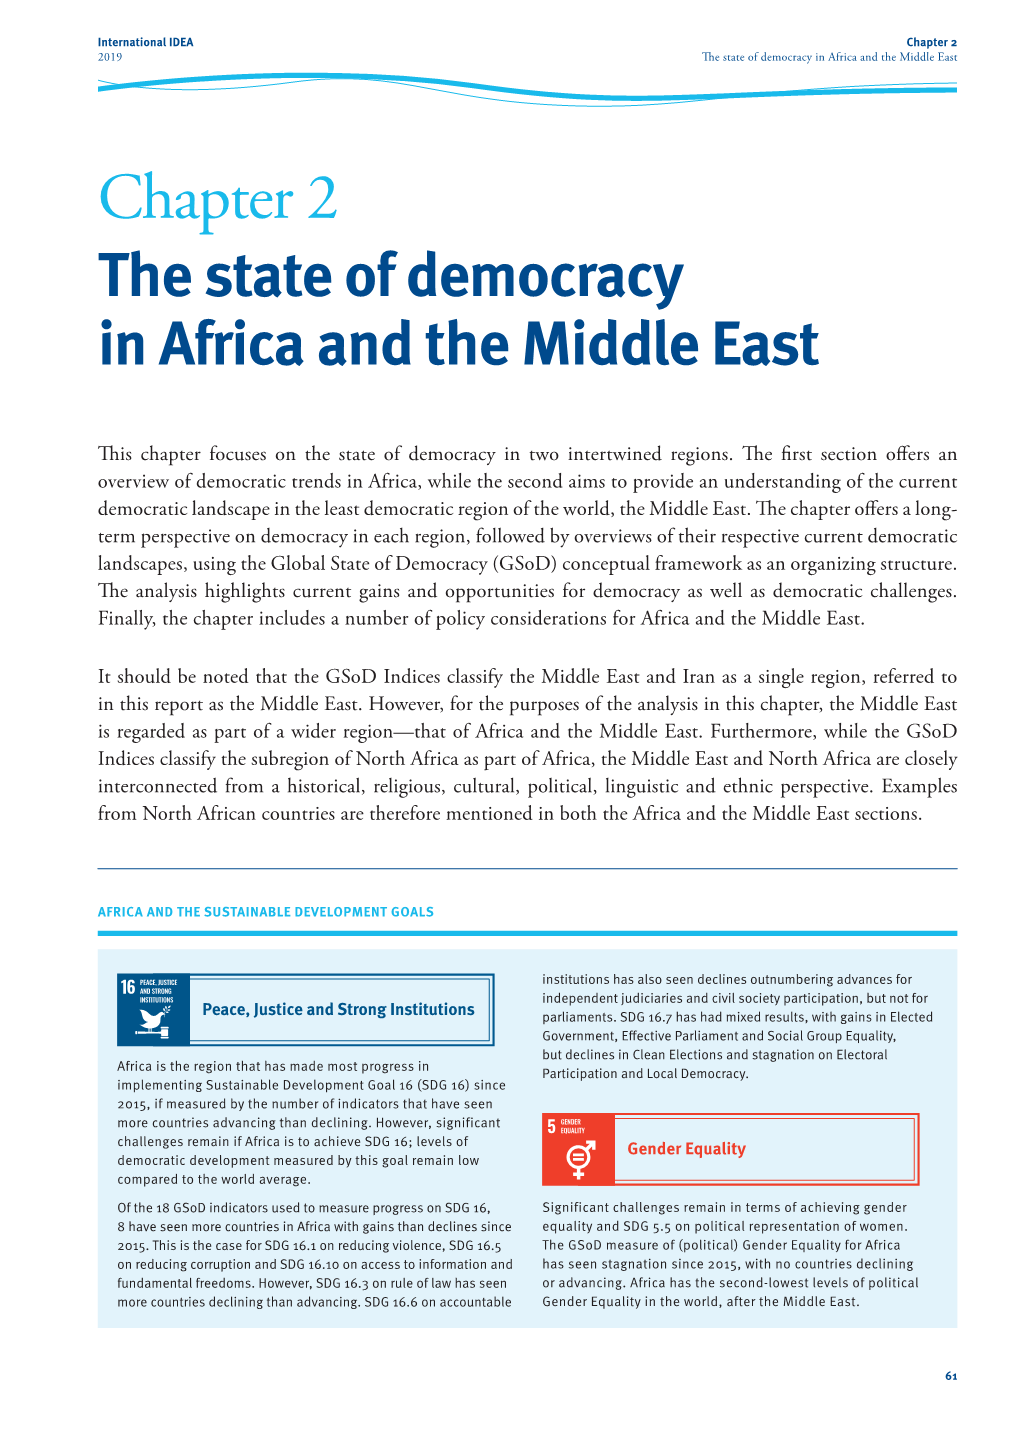 Chapter 2. the State of Democracy in Africa and The